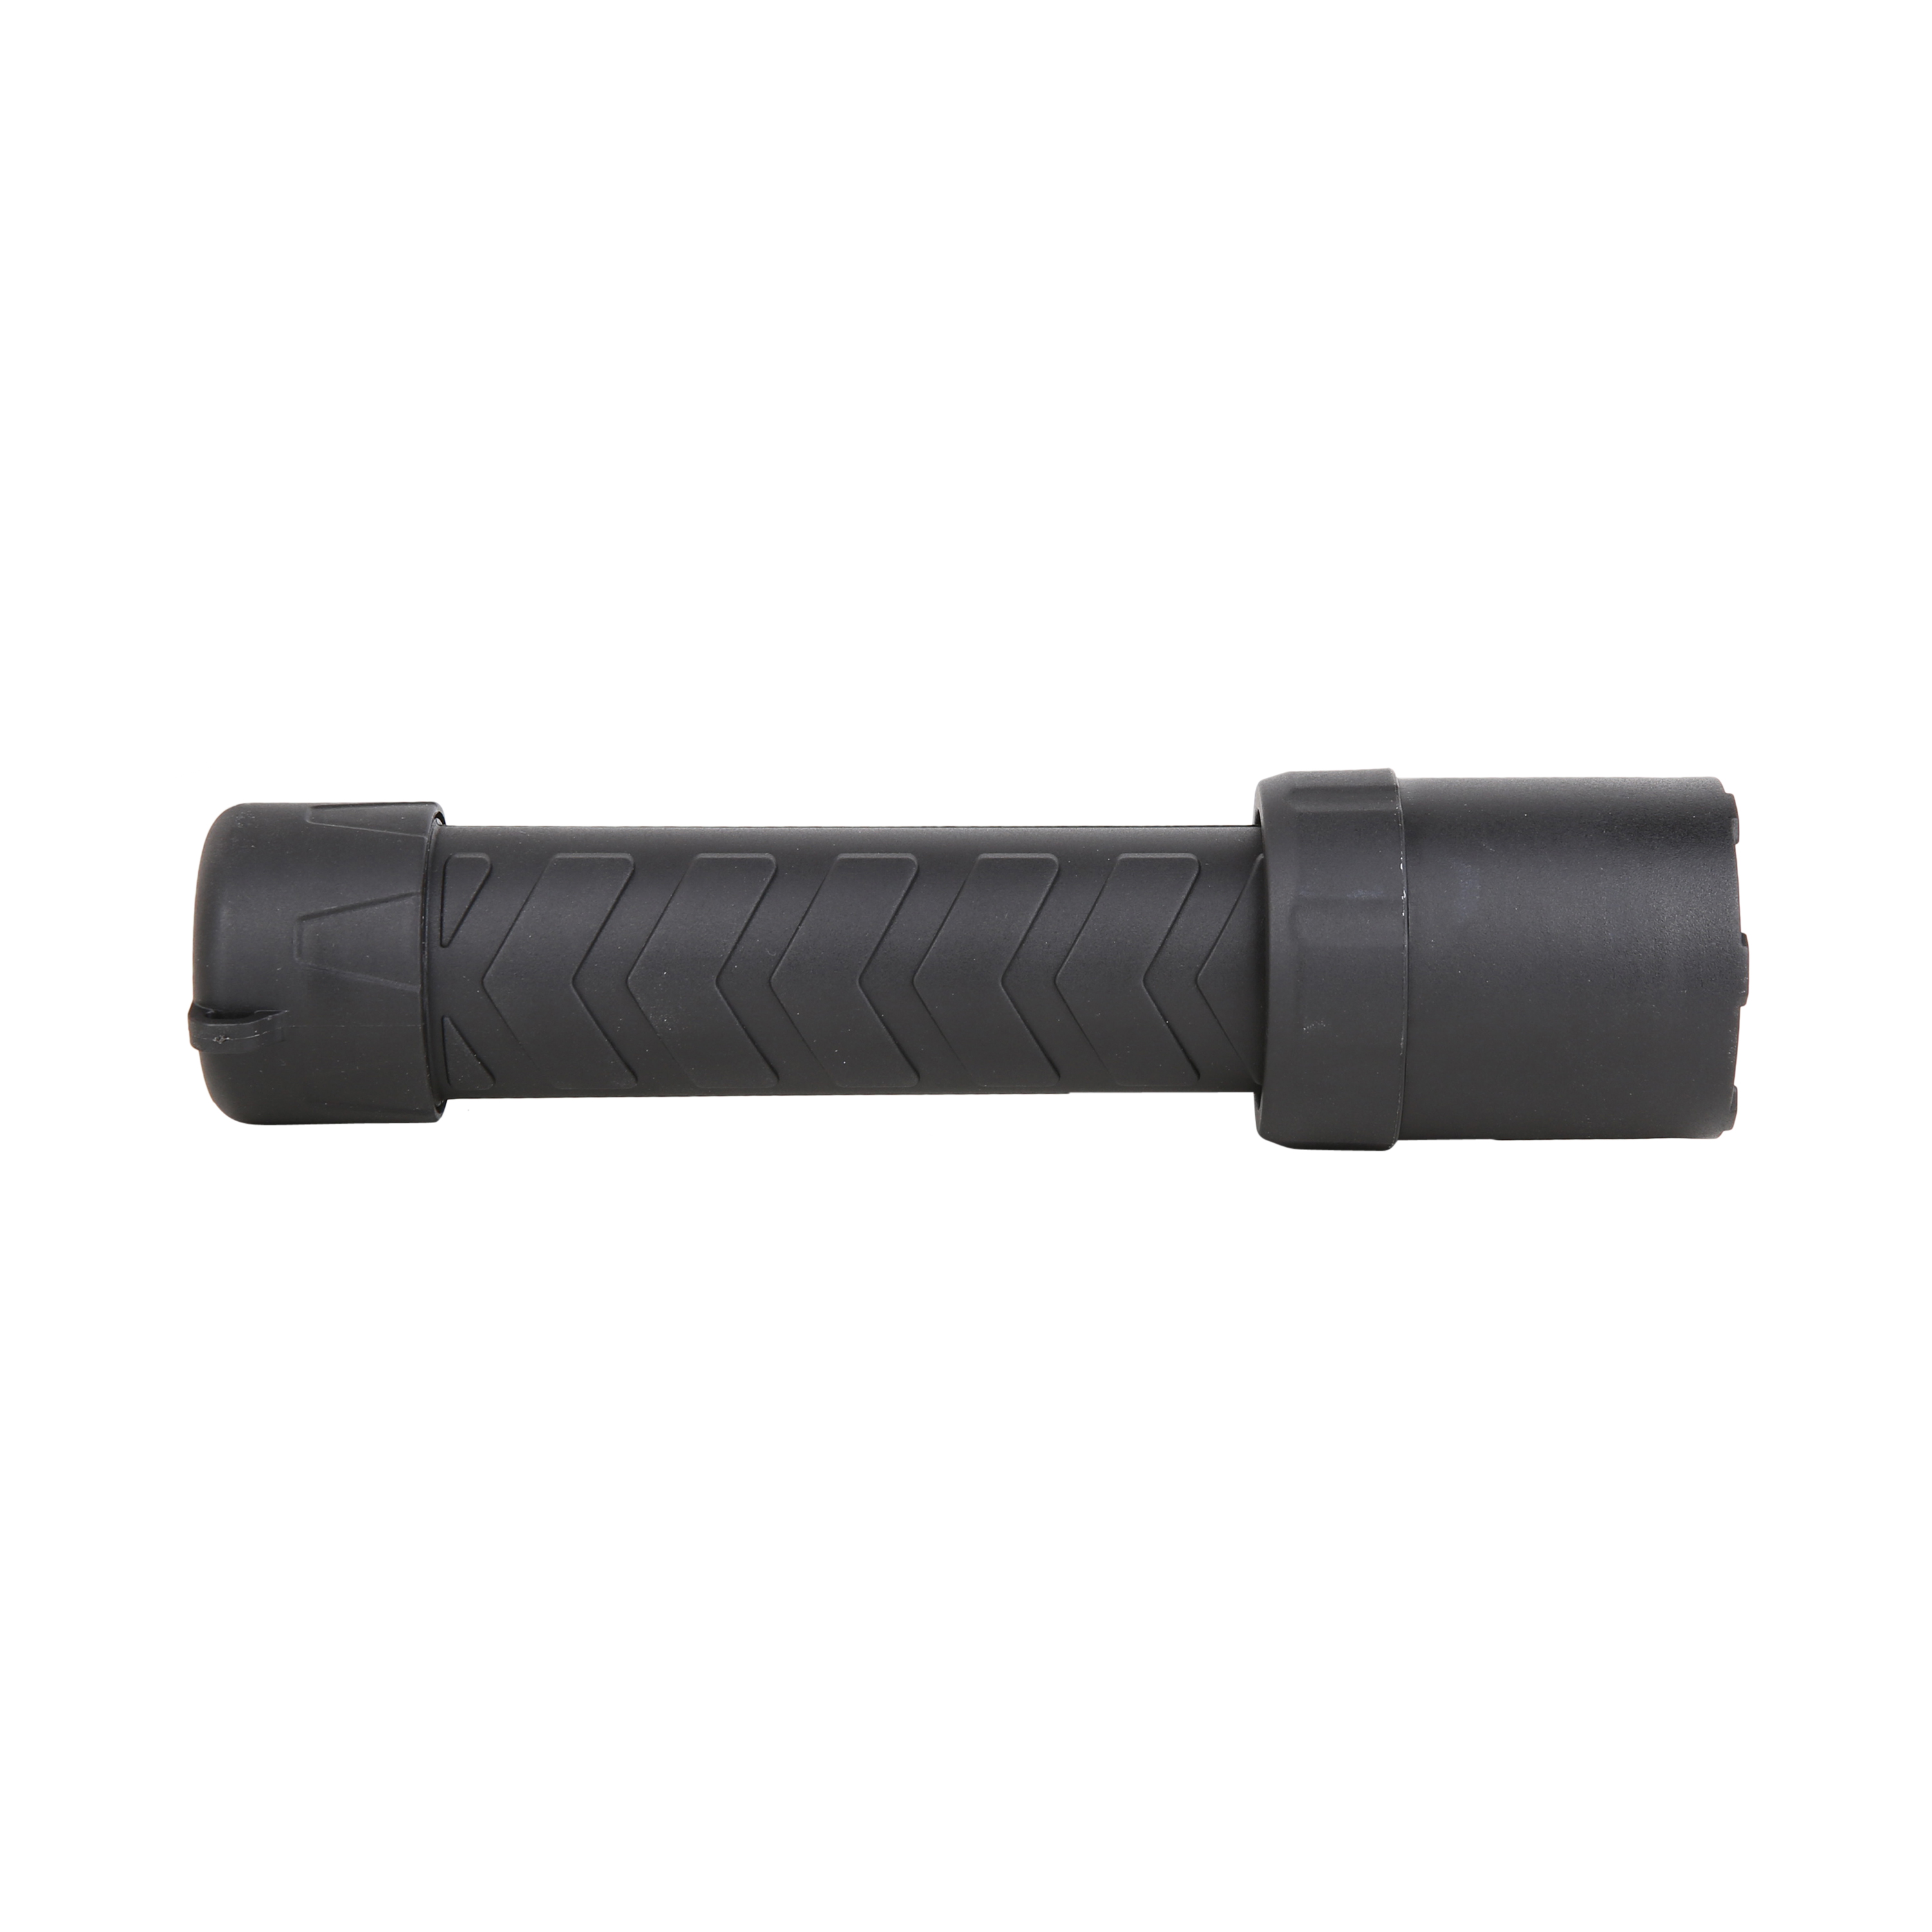 CMT STEELCORE™ 1000Lumens LED Flashlight Black, with Emergency Strobe Feature, 4 AA Batteries Included - image 2 of 7